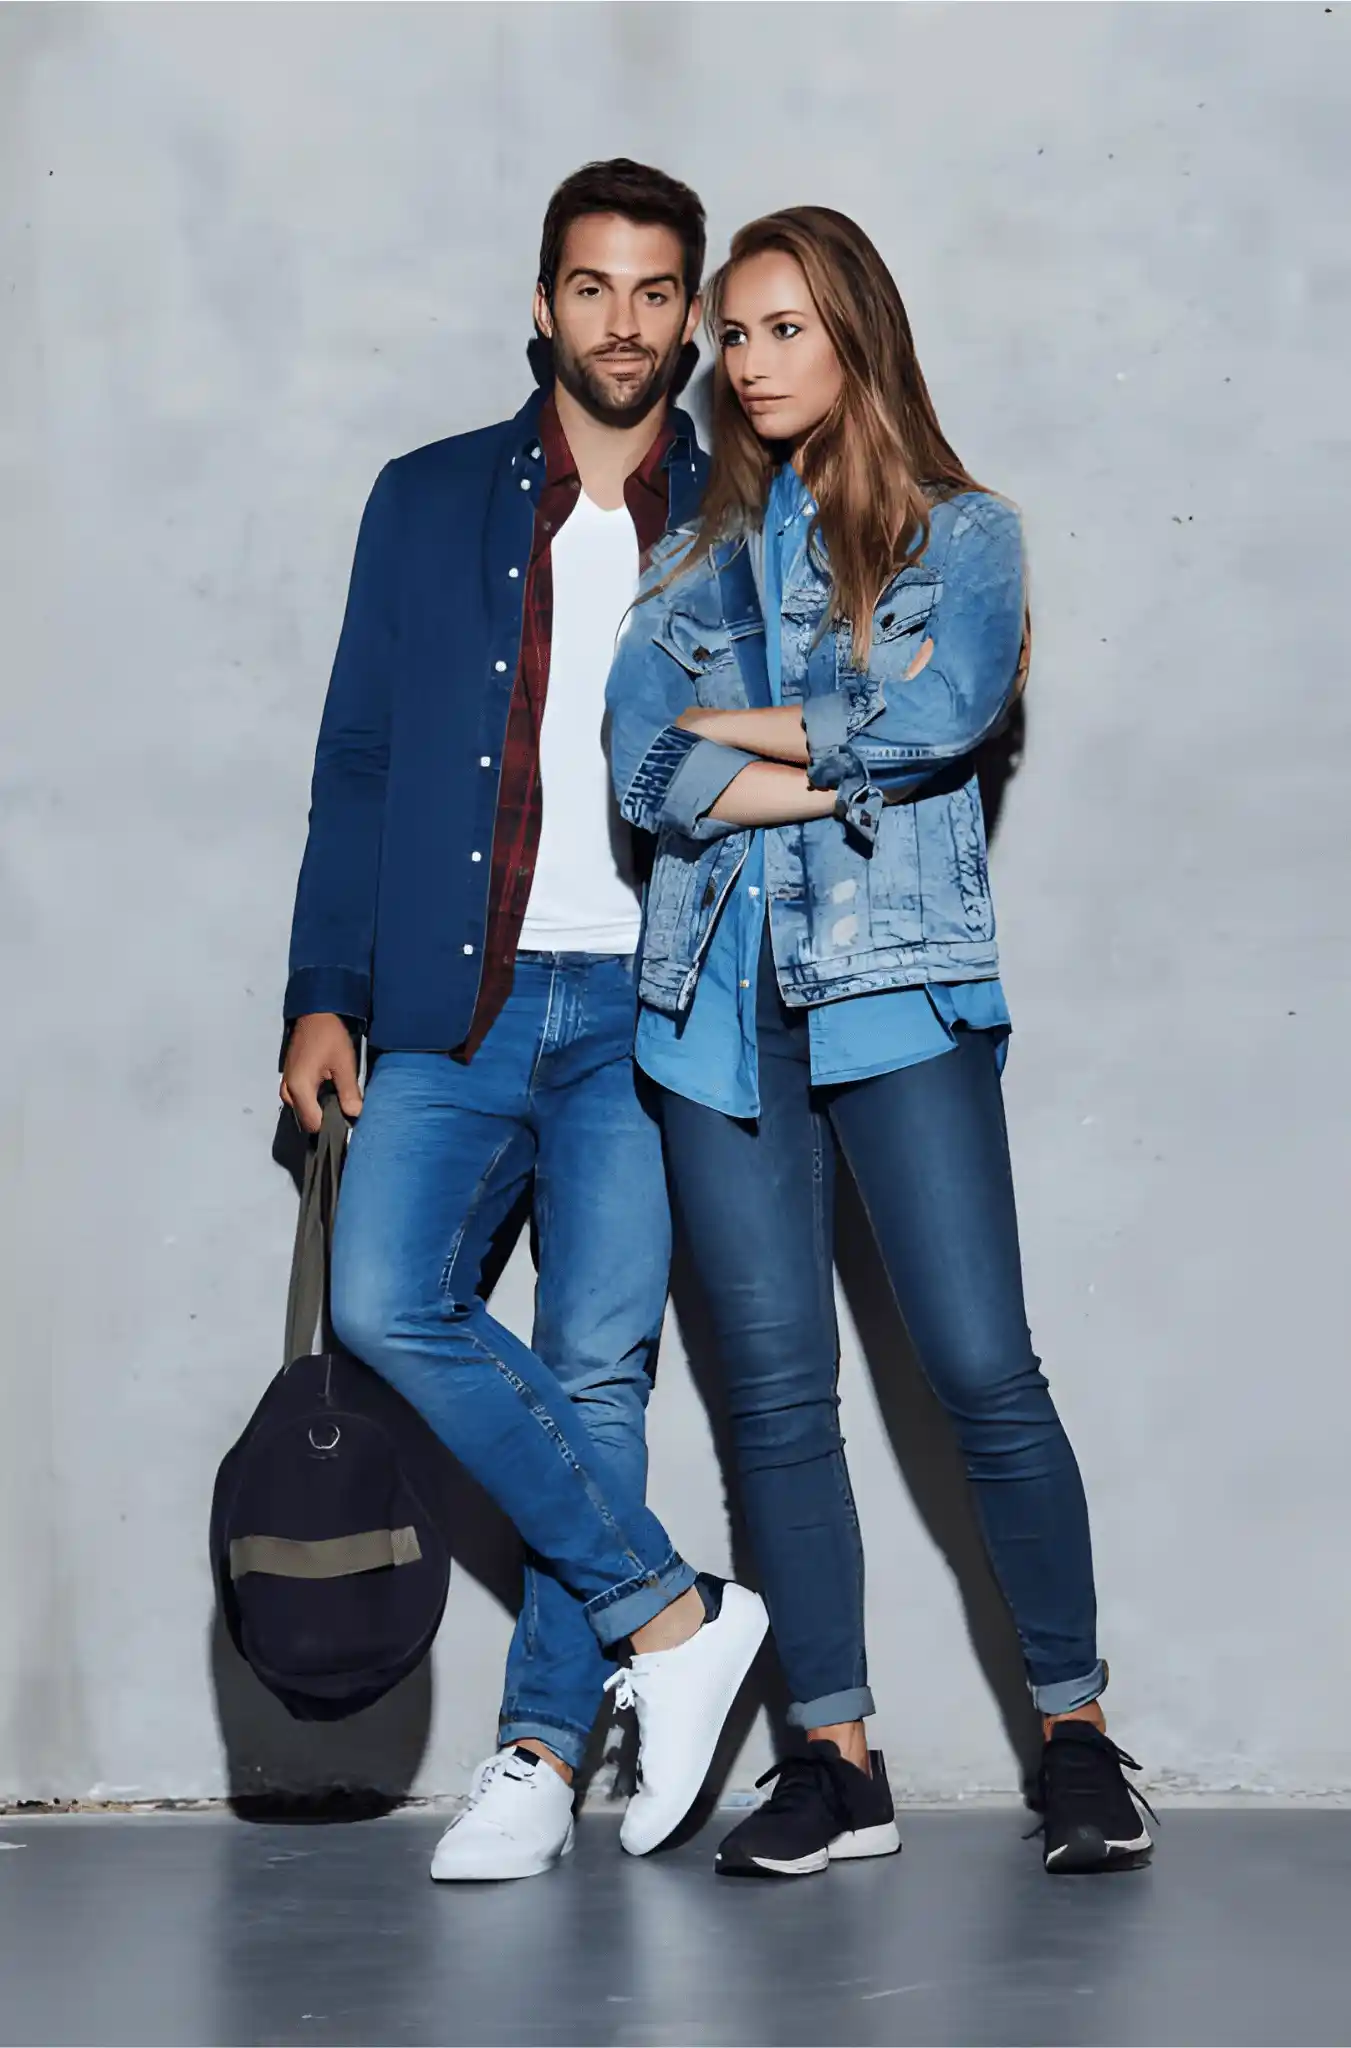 Male and female models wearing denim jacket and pants in a studio shoot.